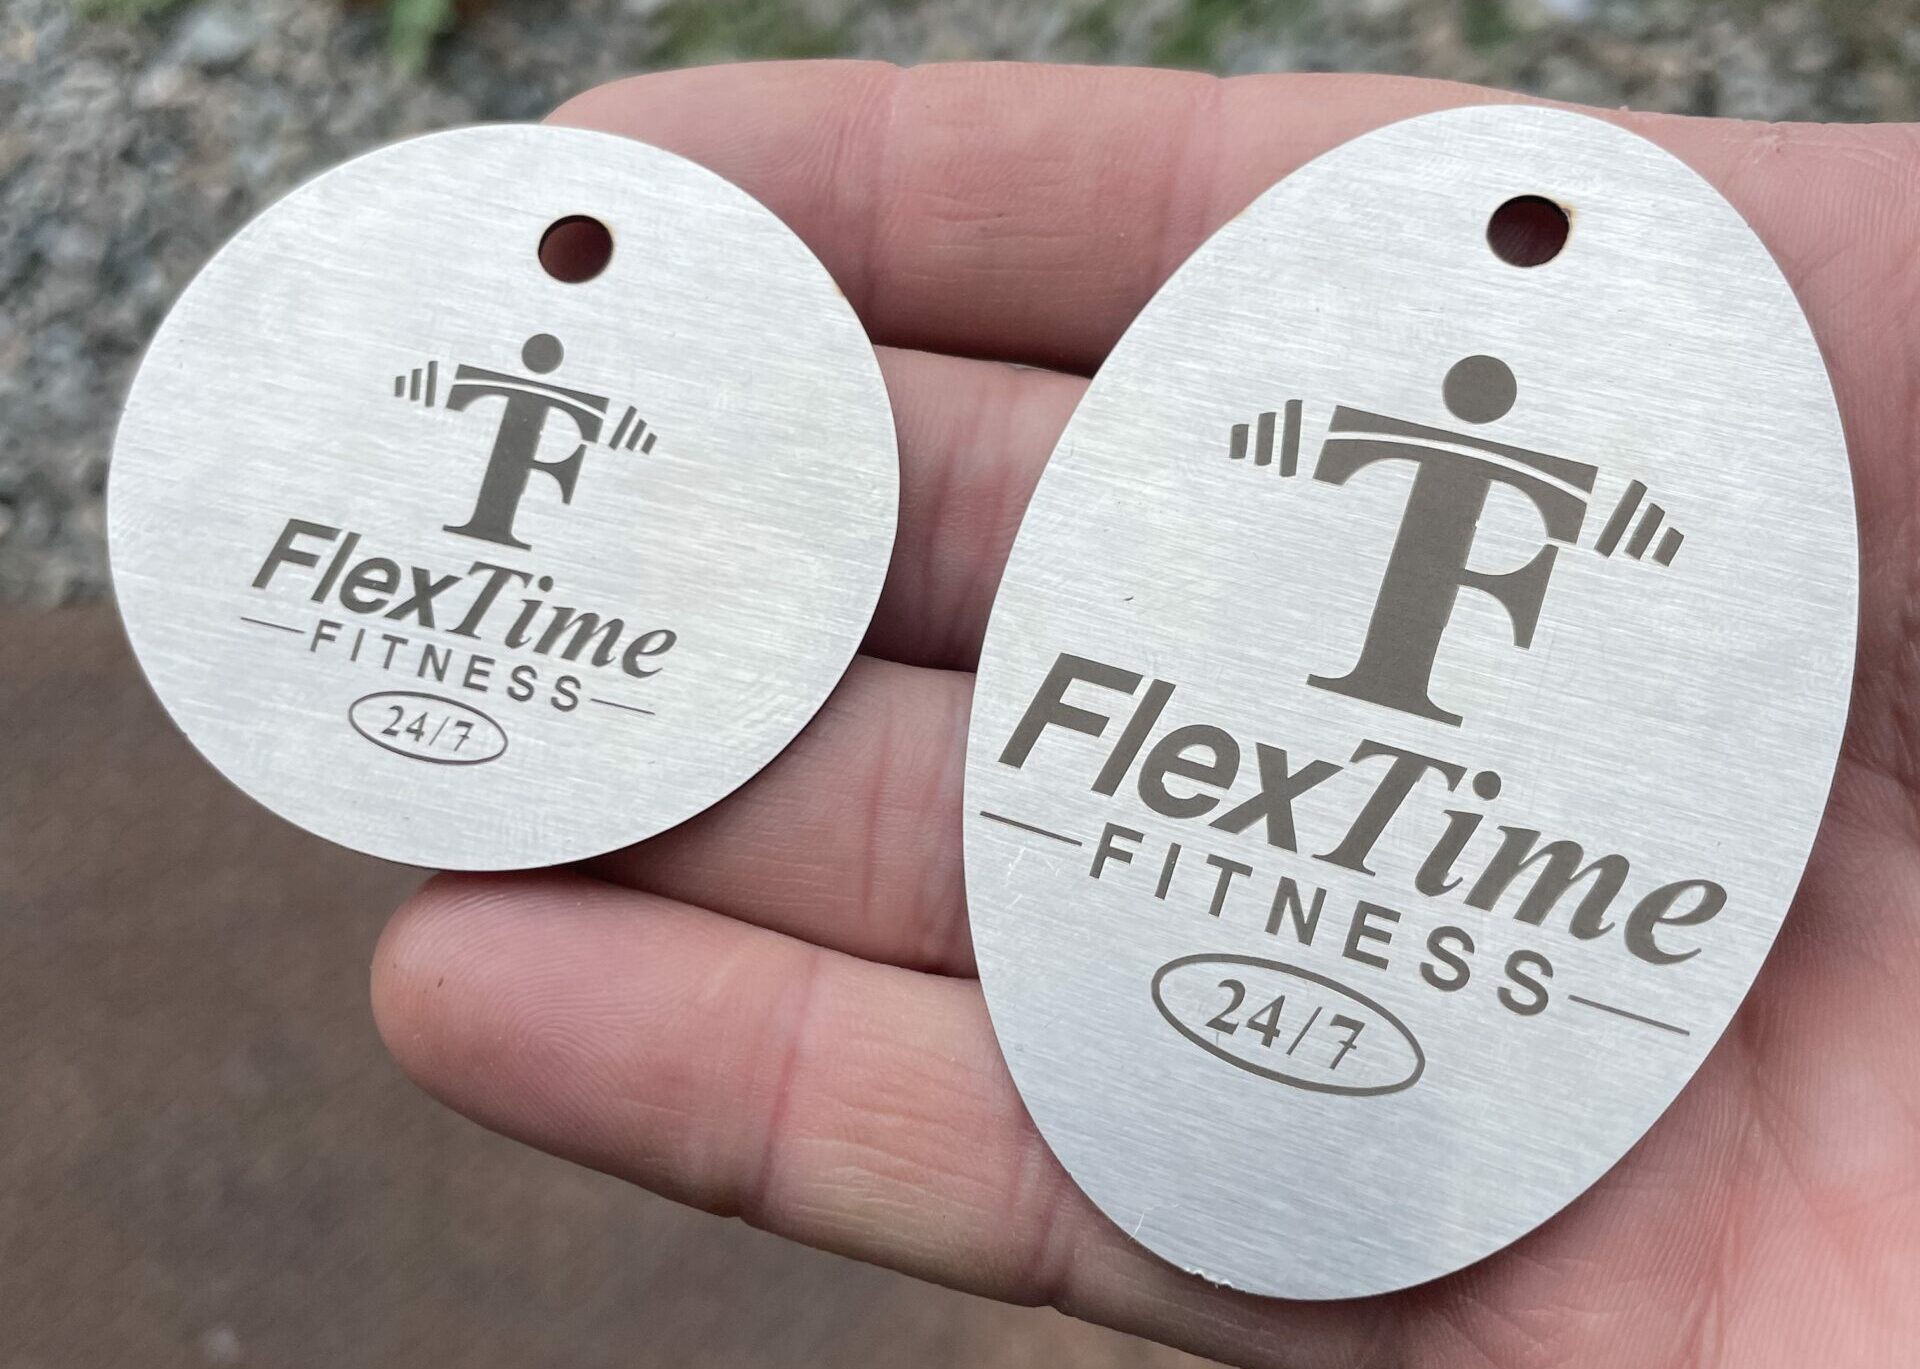 Rock Your Brand Profile with Customized Plate Logos from Laser Engraving Pros